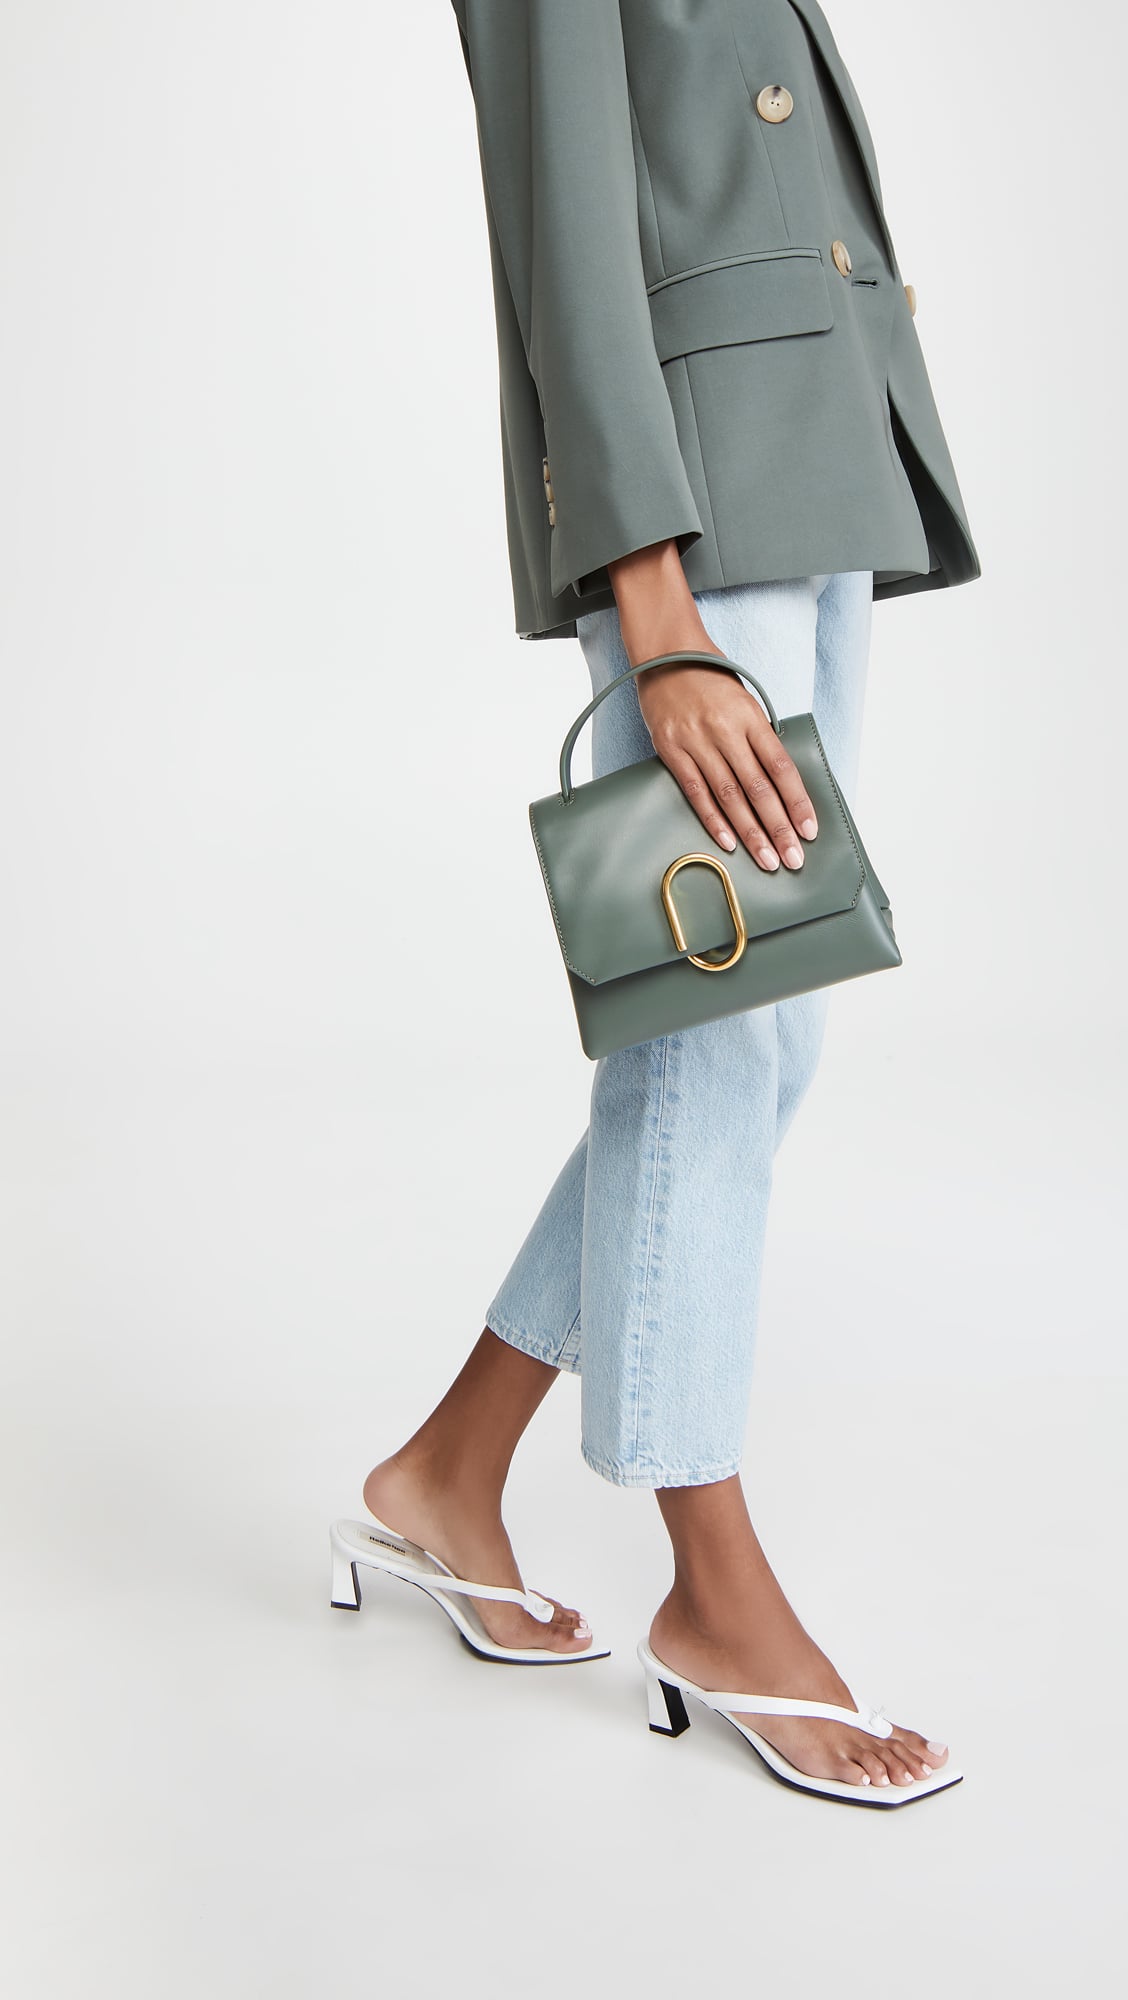 3.1 Phillip Alix Mini Top Handle Satchel | 29 Editor-Approved Fall Bags So Good, They're Begging You to Carry | POPSUGAR Fashion Photo 22